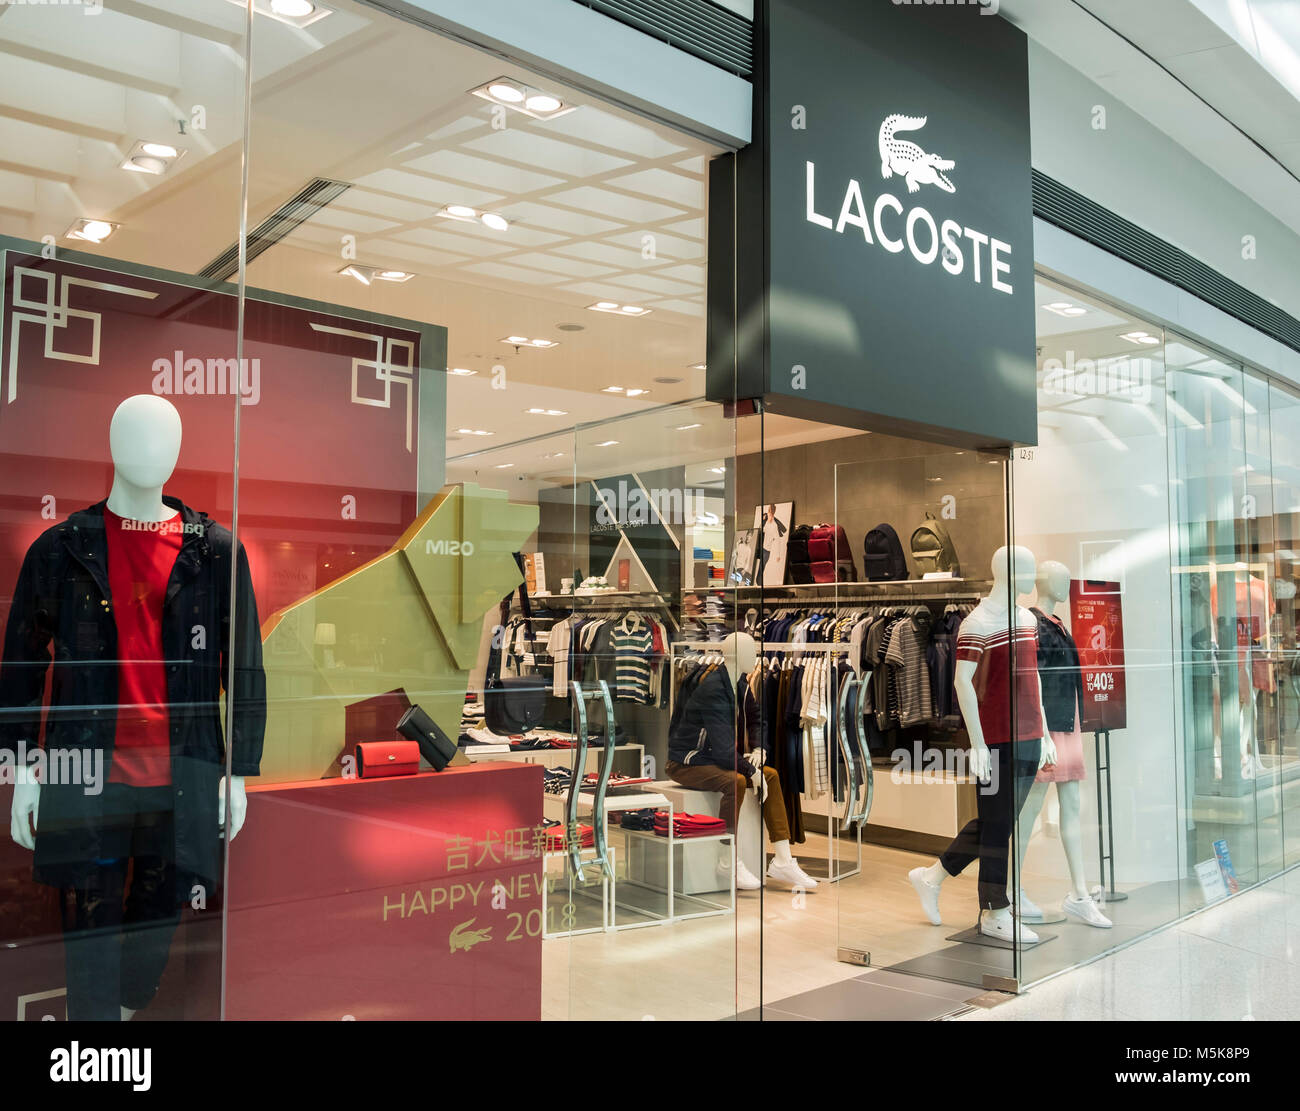 lacoste outlet factory, OFF 71%,Buy!